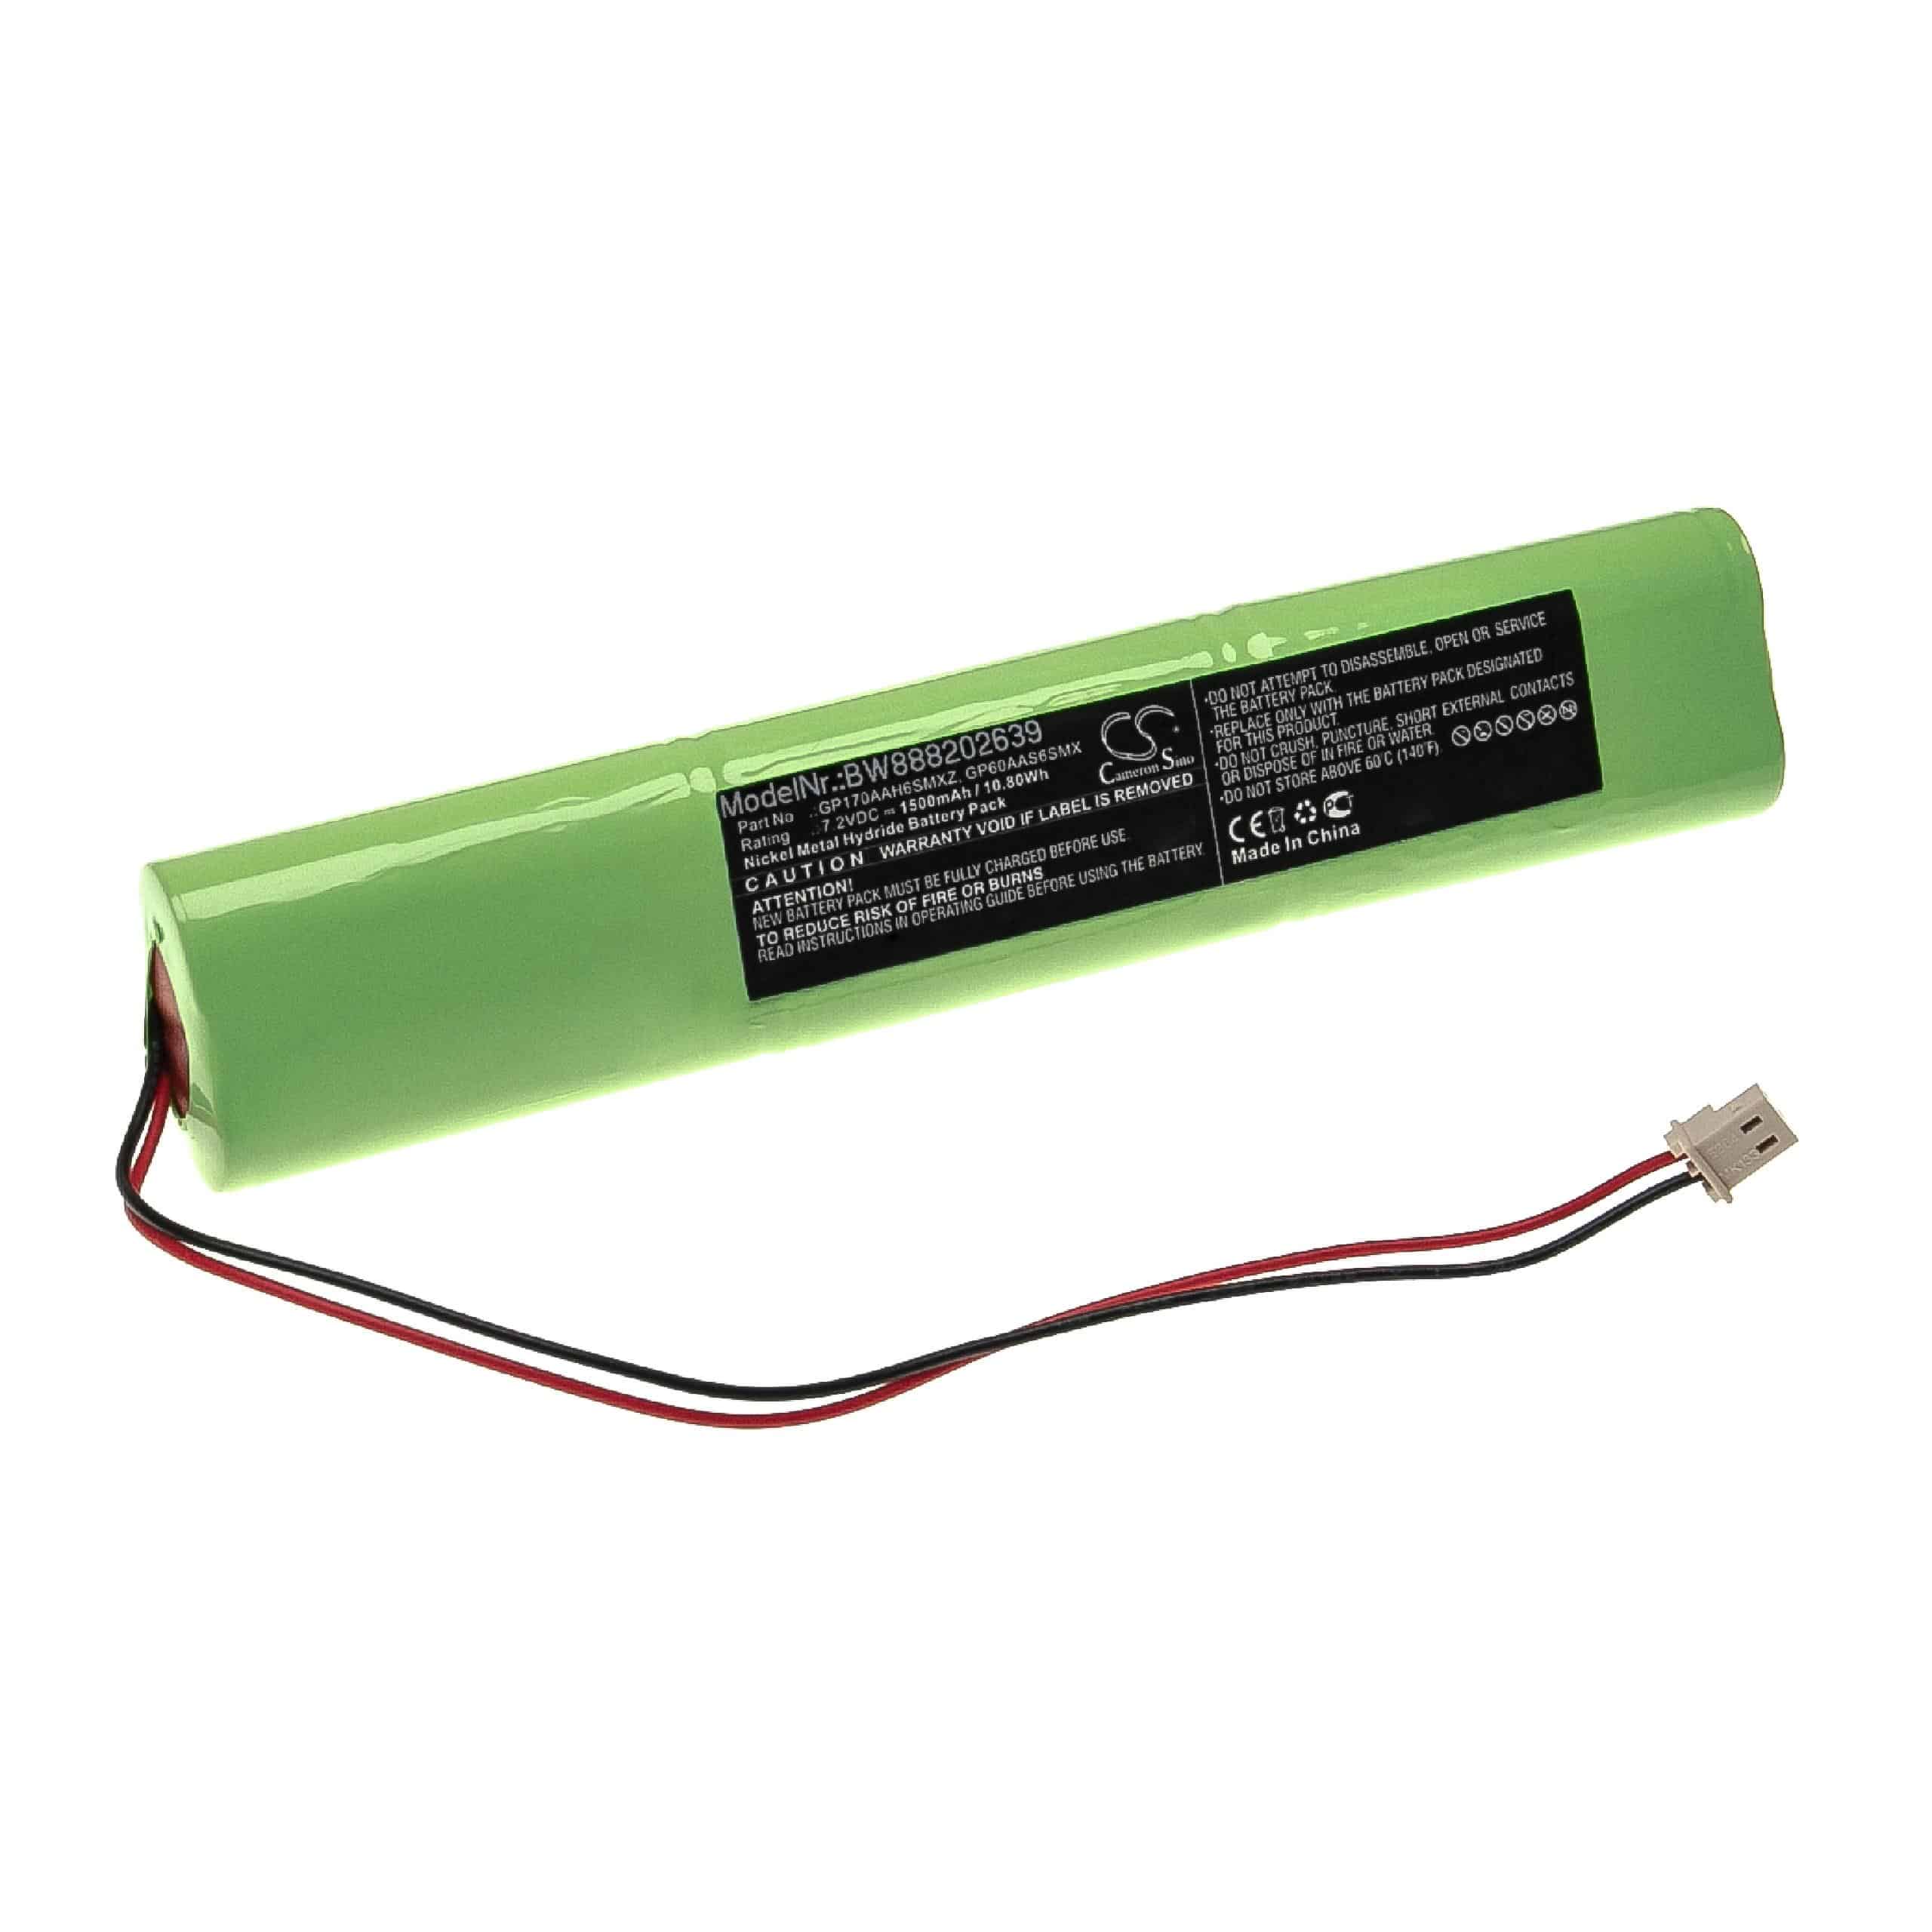 Alarm System Battery Replacement for AEM GP170AAH6SMXZ, GP60AAS6SMX - 1500mAh 7.2V NiMH